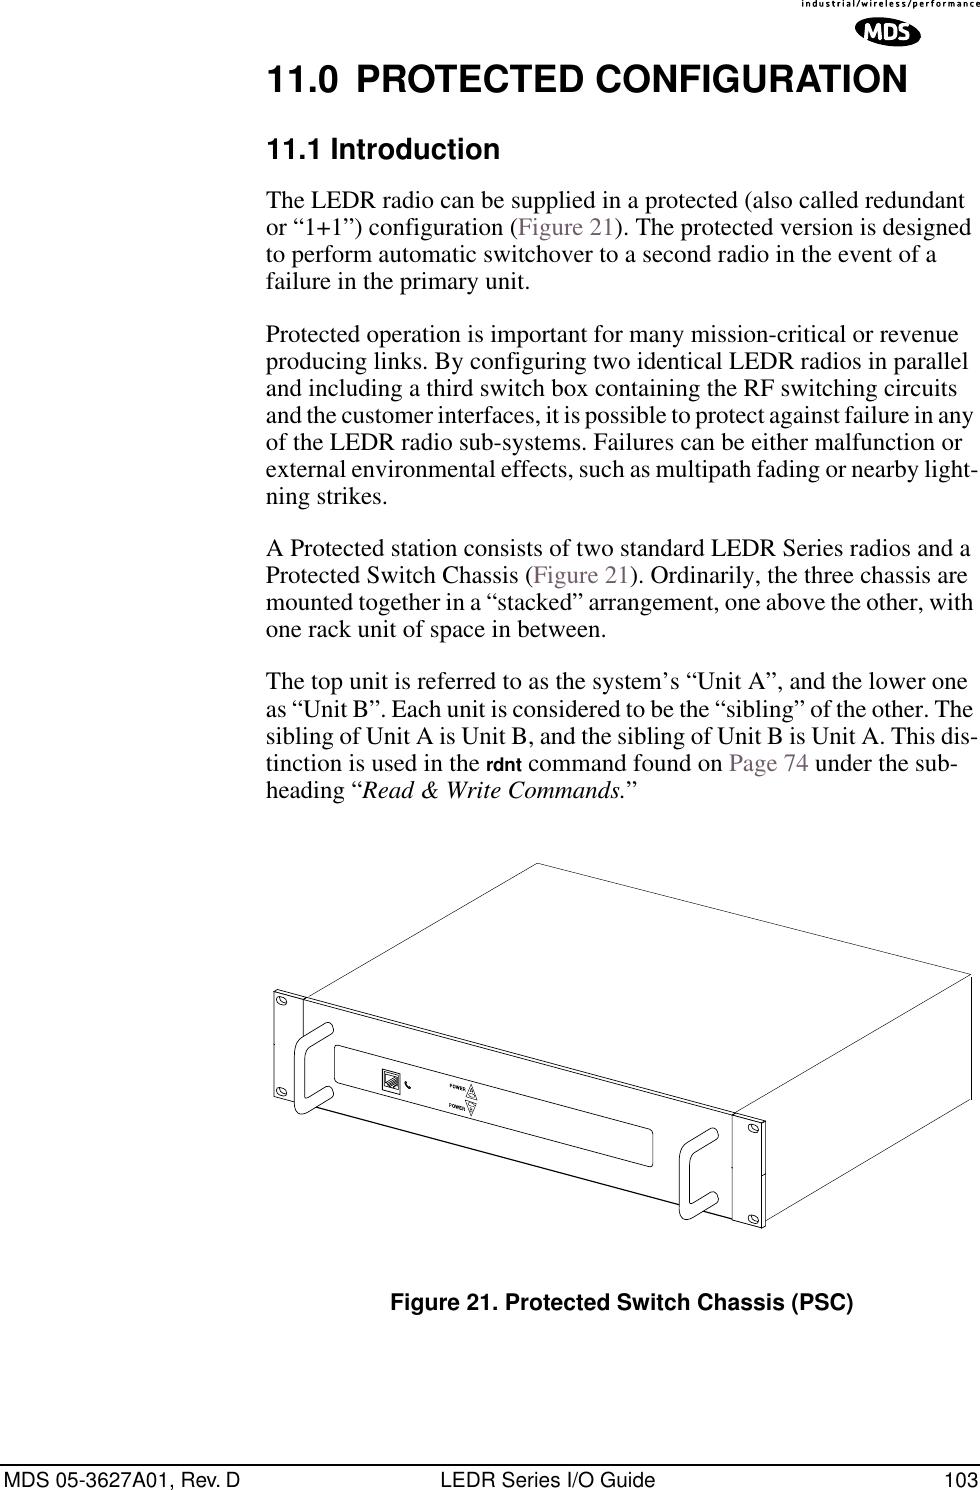 MDS 05-3627A01, Rev. D LEDR Series I/O Guide 10311.0 PROTECTED CONFIGURATION11.1 IntroductionThe LEDR radio can be supplied in a protected (also called redundant or “1+1”) configuration (Figure 21). The protected version is designed to perform automatic switchover to a second radio in the event of a failure in the primary unit.Protected operation is important for many mission-critical or revenue producing links. By configuring two identical LEDR radios in parallel and including a third switch box containing the RF switching circuits and the customer interfaces, it is possible to protect against failure in any of the LEDR radio sub-systems. Failures can be either malfunction or external environmental effects, such as multipath fading or nearby light-ning strikes.A Protected station consists of two standard LEDR Series radios and a Protected Switch Chassis (Figure 21). Ordinarily, the three chassis are mounted together in a “stacked” arrangement, one above the other, with one rack unit of space in between.The top unit is referred to as the system’s “Unit A”, and the lower one as “Unit B”. Each unit is considered to be the “sibling” of the other. The sibling of Unit A is Unit B, and the sibling of Unit B is Unit A. This dis-tinction is used in the rdnt command found on Page 74 under the sub-heading “Read &amp; Write Commands.”Invisible place holderFigure 21. Protected Switch Chassis (PSC)